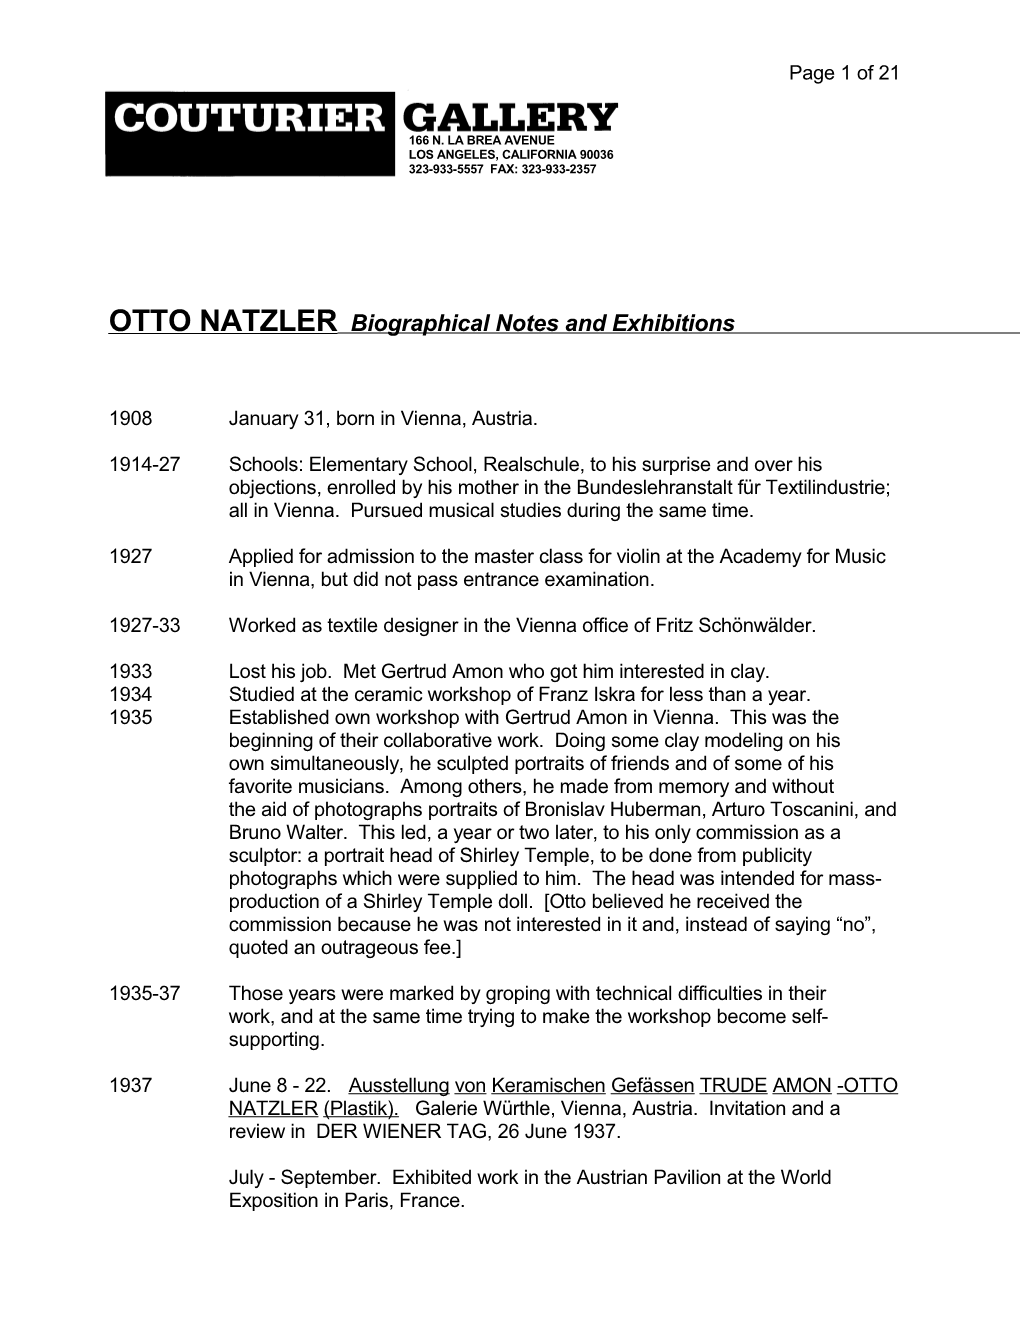 OTTO NATZLER Biographical Notes and Exhibitions